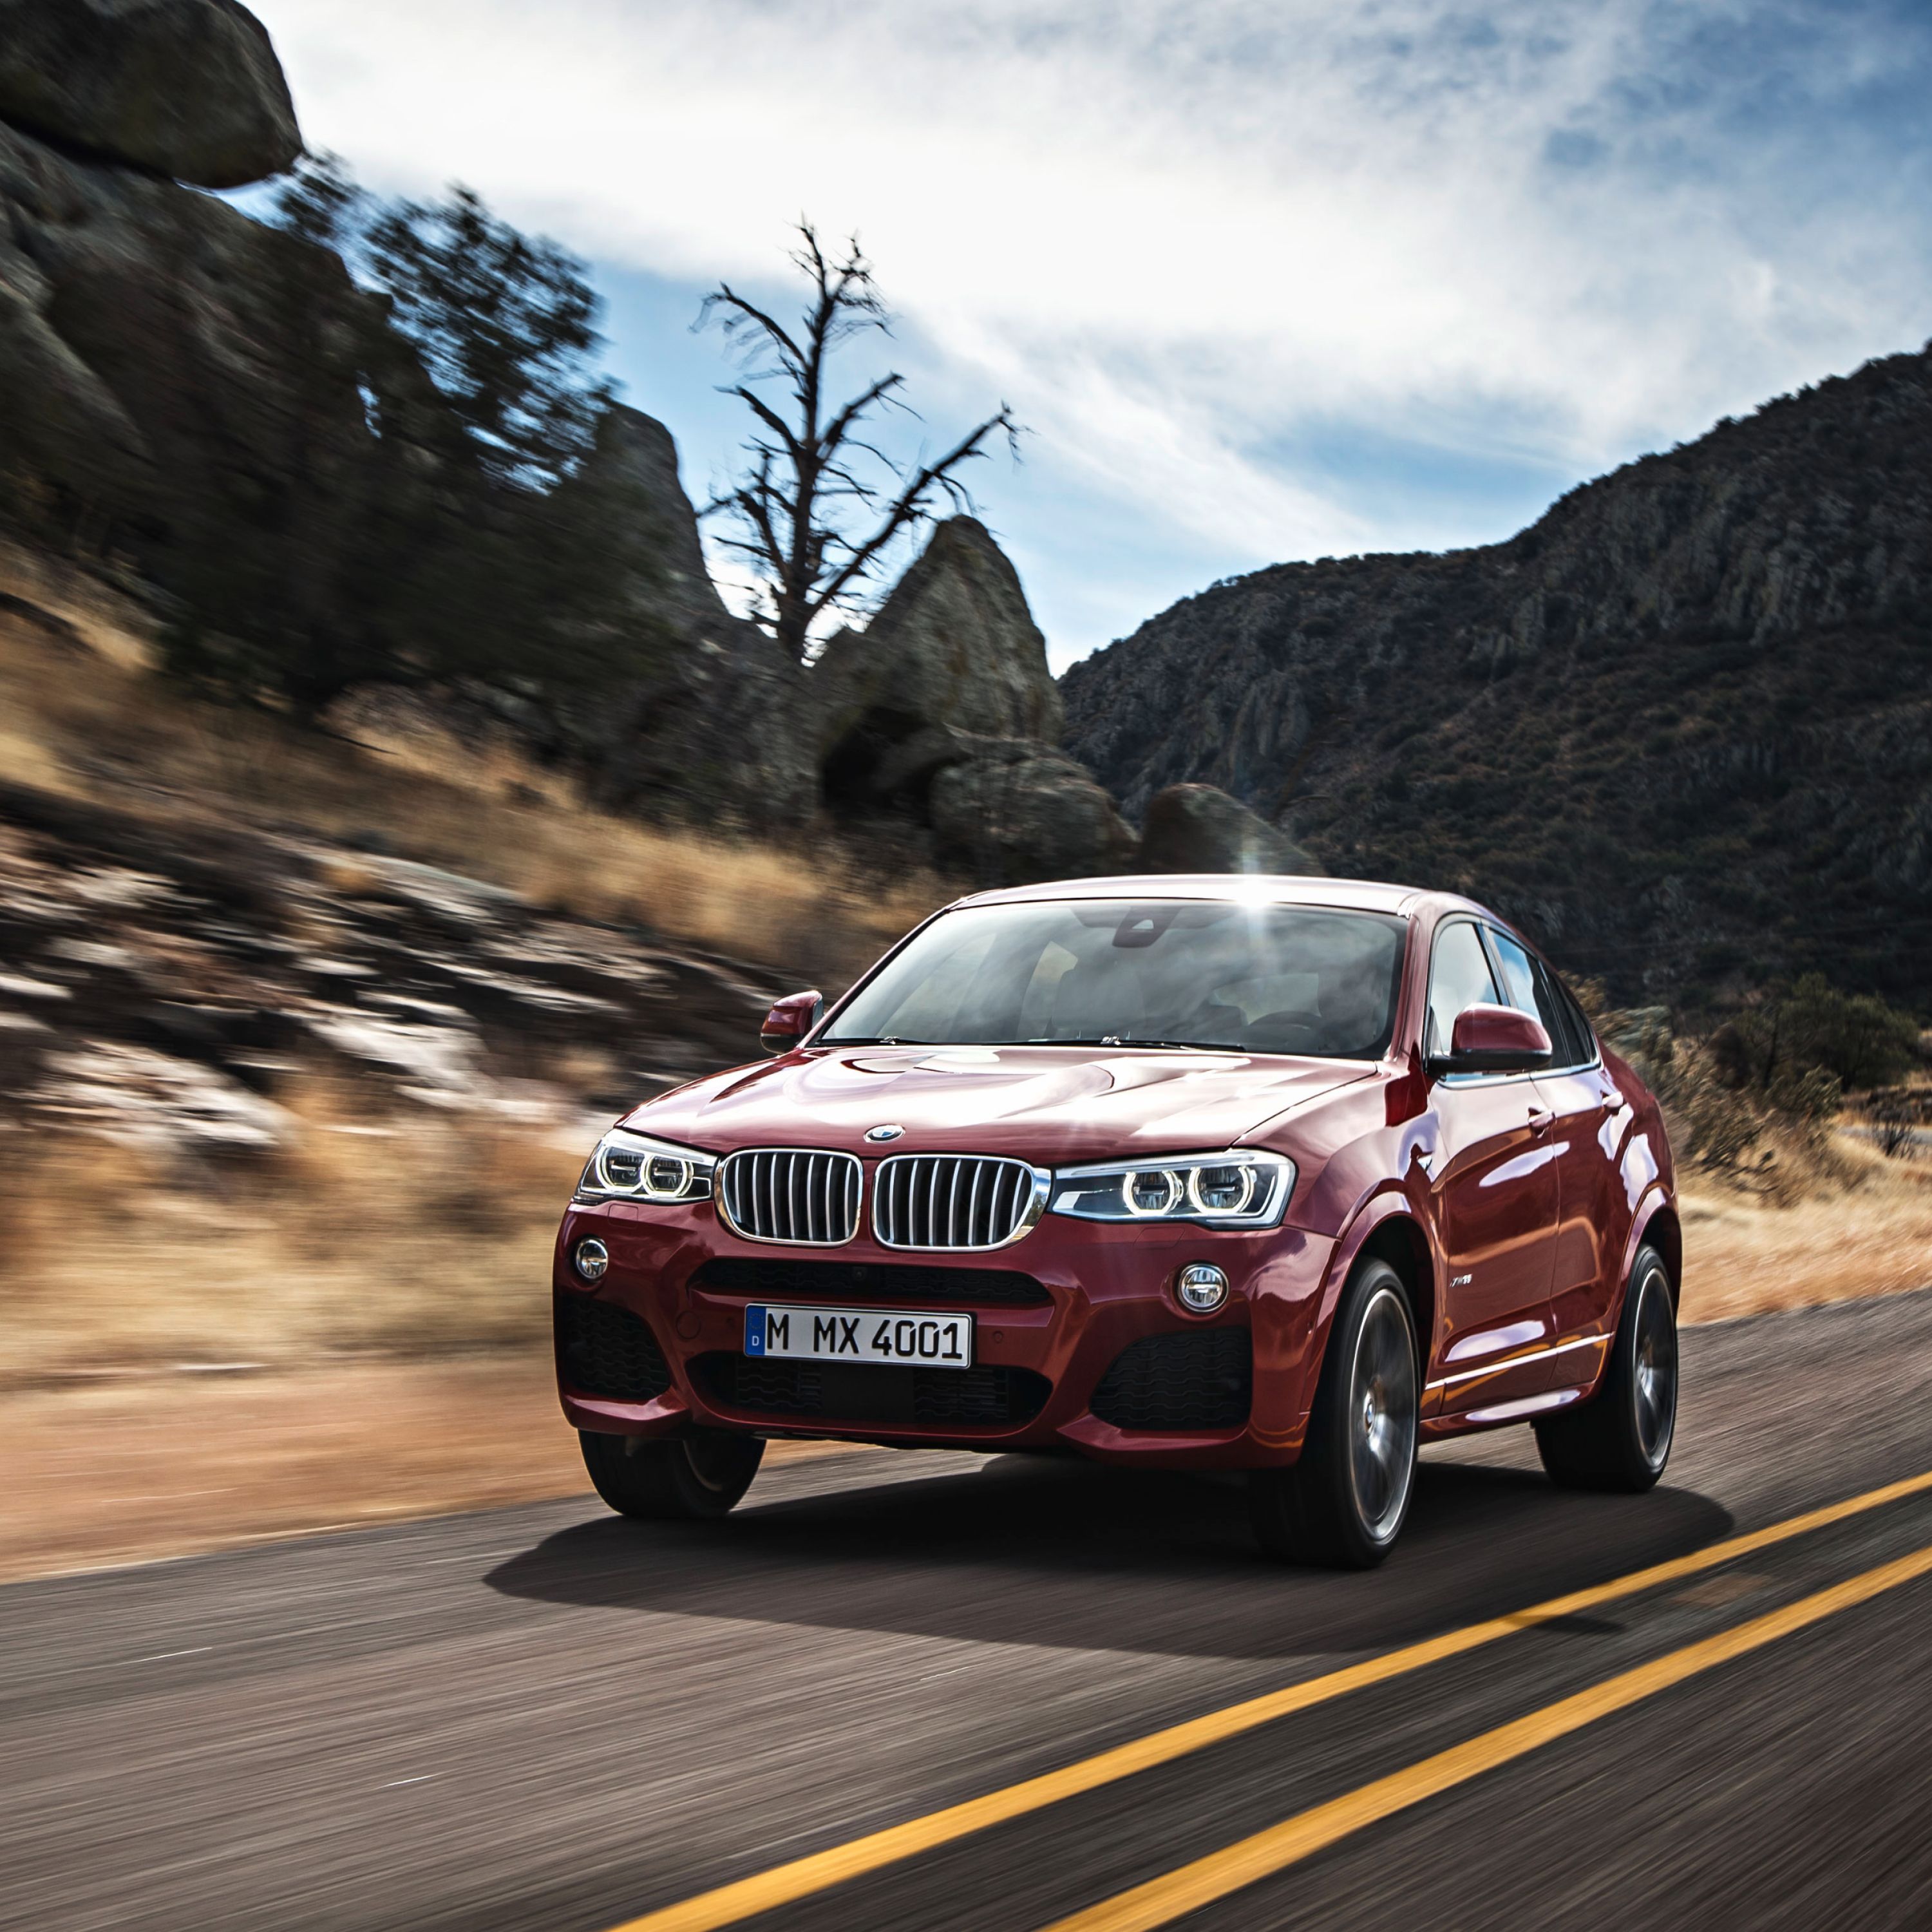 BMW X4 F26 SUV driving on a country rode through an American rocky mountain area